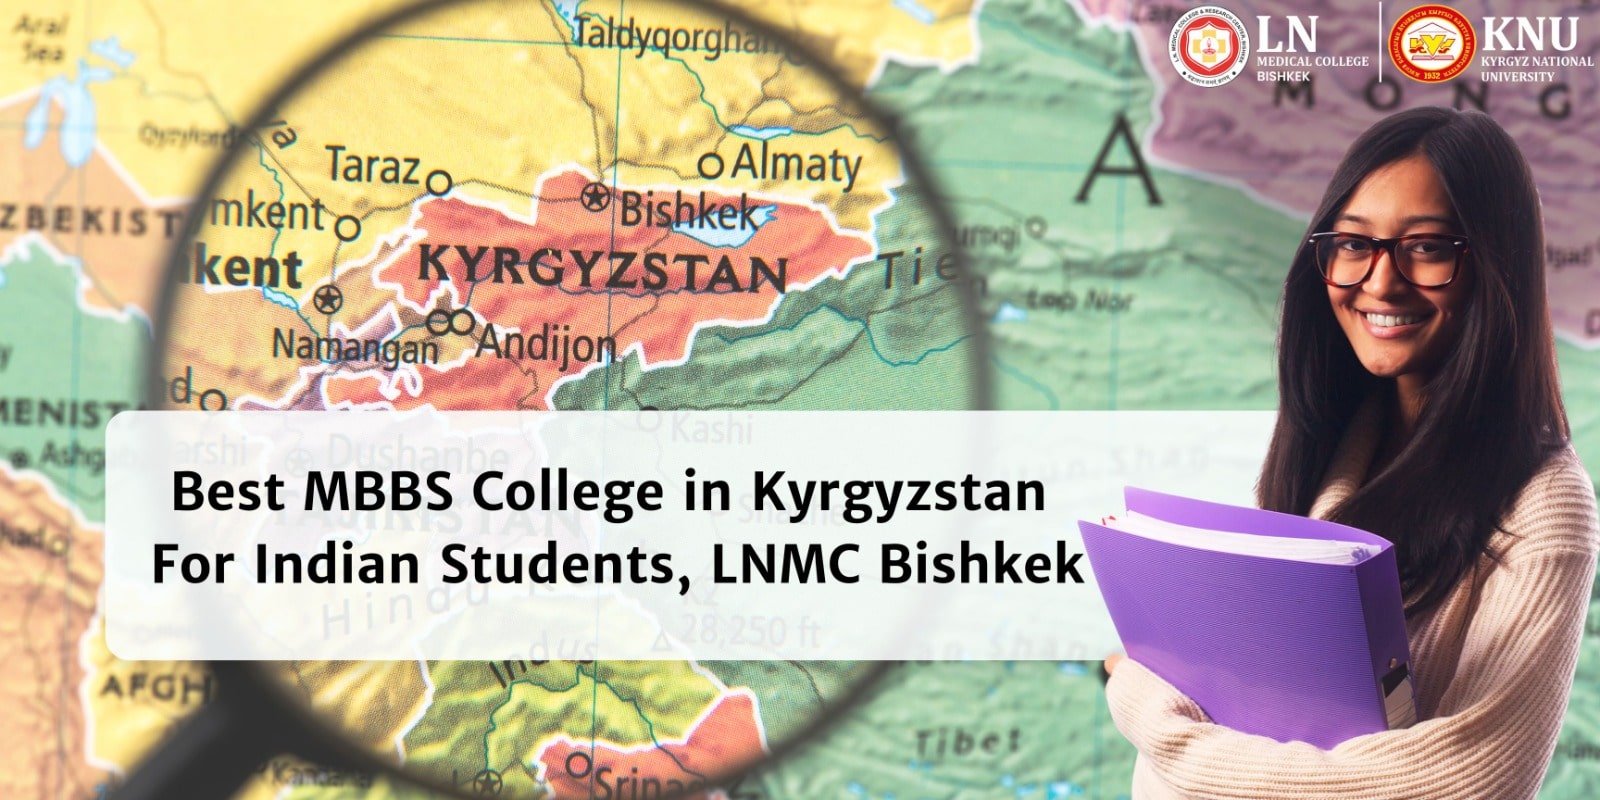 Best MBBS College in Kyrgyzstan For Indian Students, LNMC Bishkek - Blog - LN Medical Collage